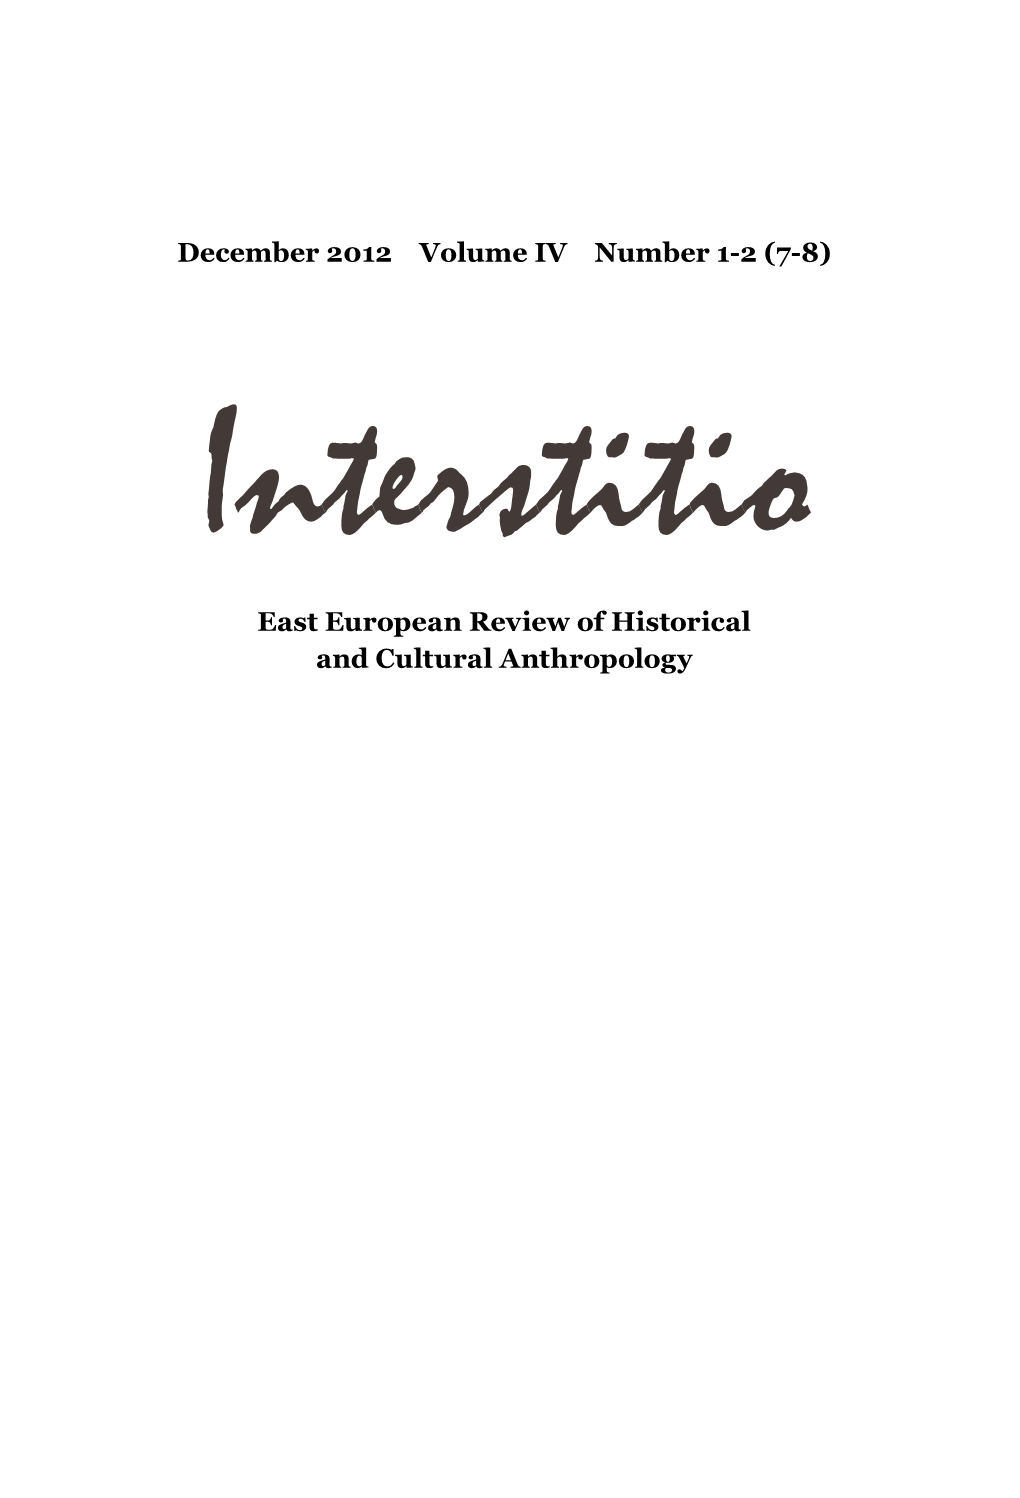 Interstitio East European Review of Historical and Cultural Anthropology INTERSTITIO East European Review of Historical and Cultural Anthropology